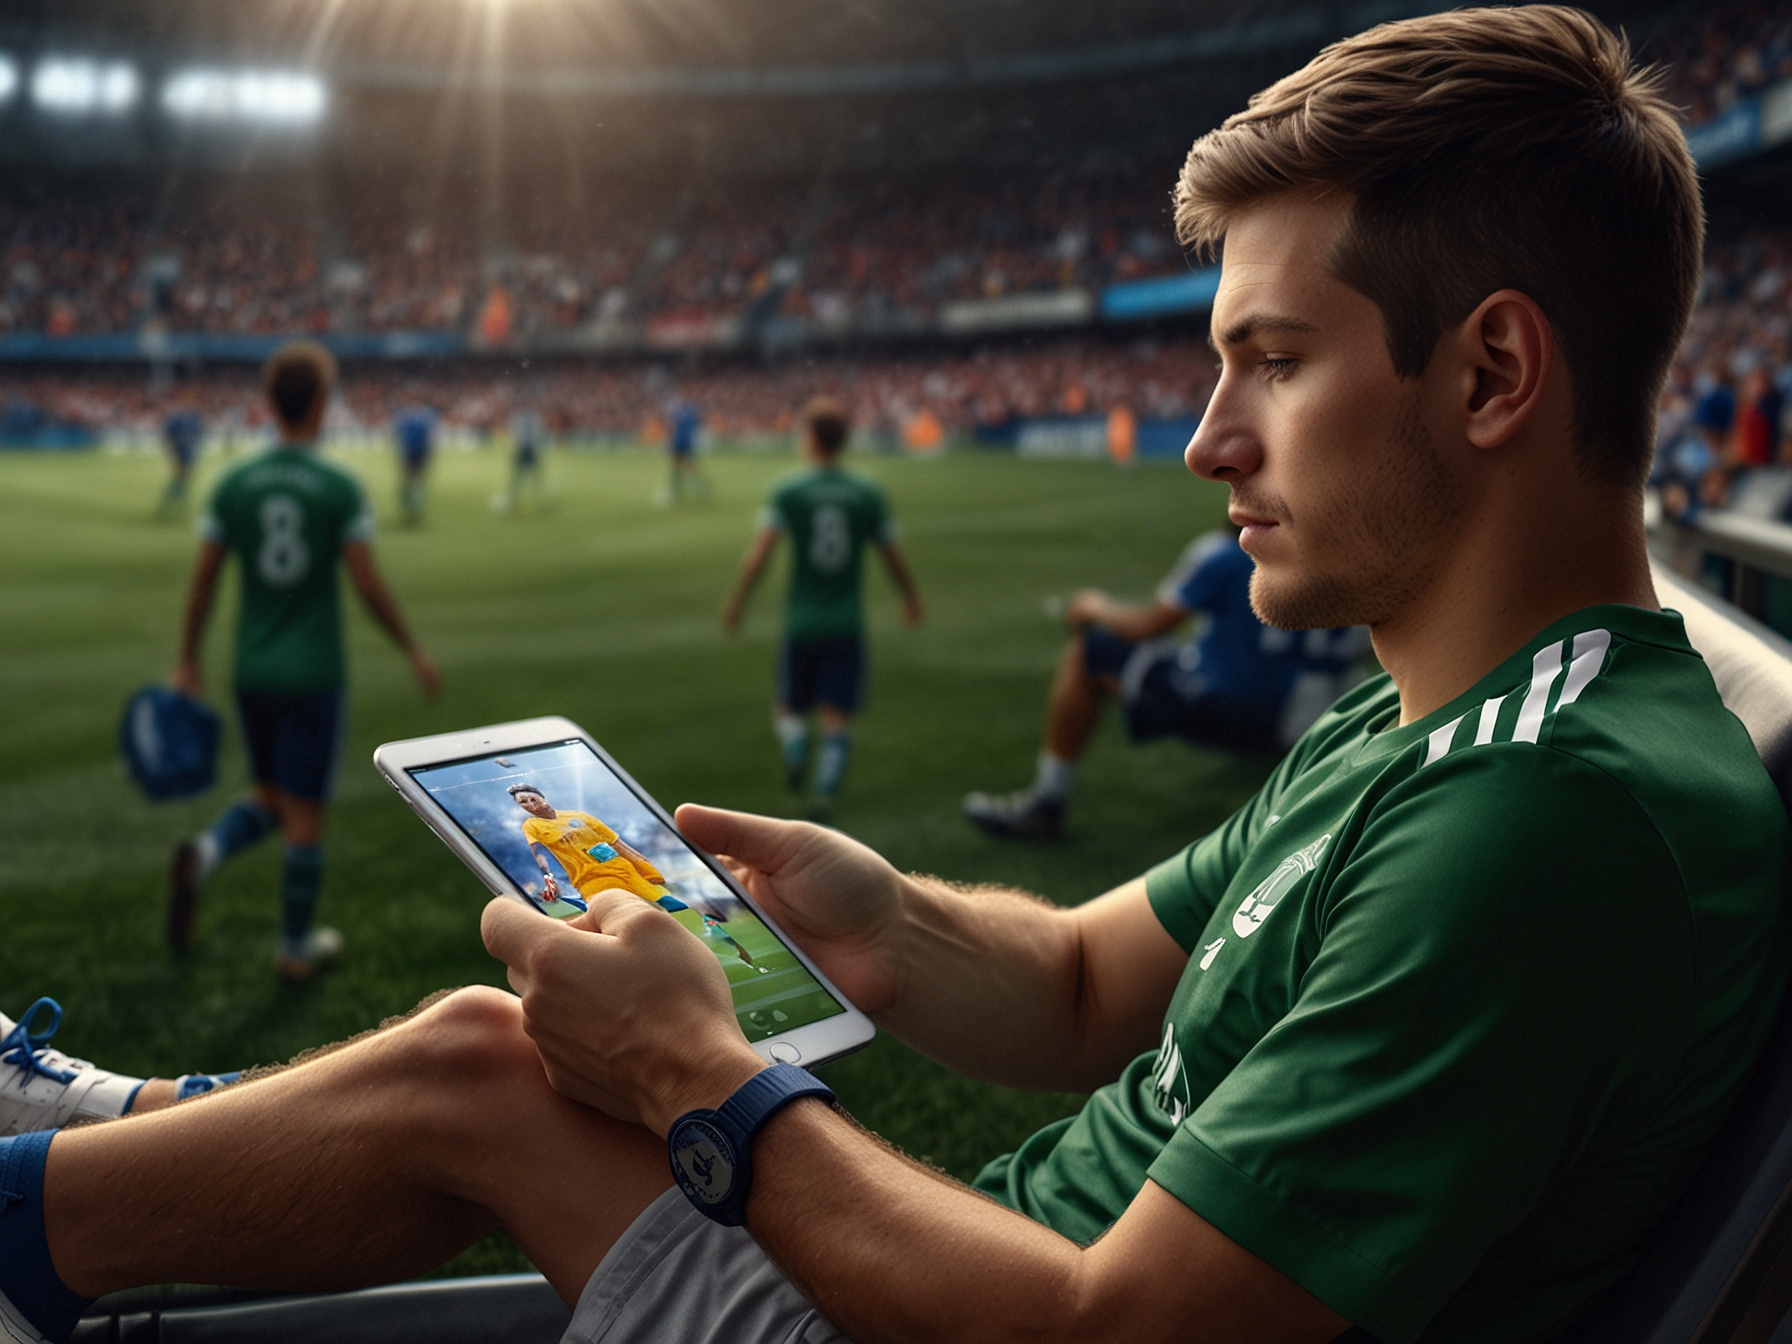 A soccer fan using Apple’s MLS Season Pass on their tablet, activating the Catch Up feature to stay updated with key plays and highlights during an ongoing match.